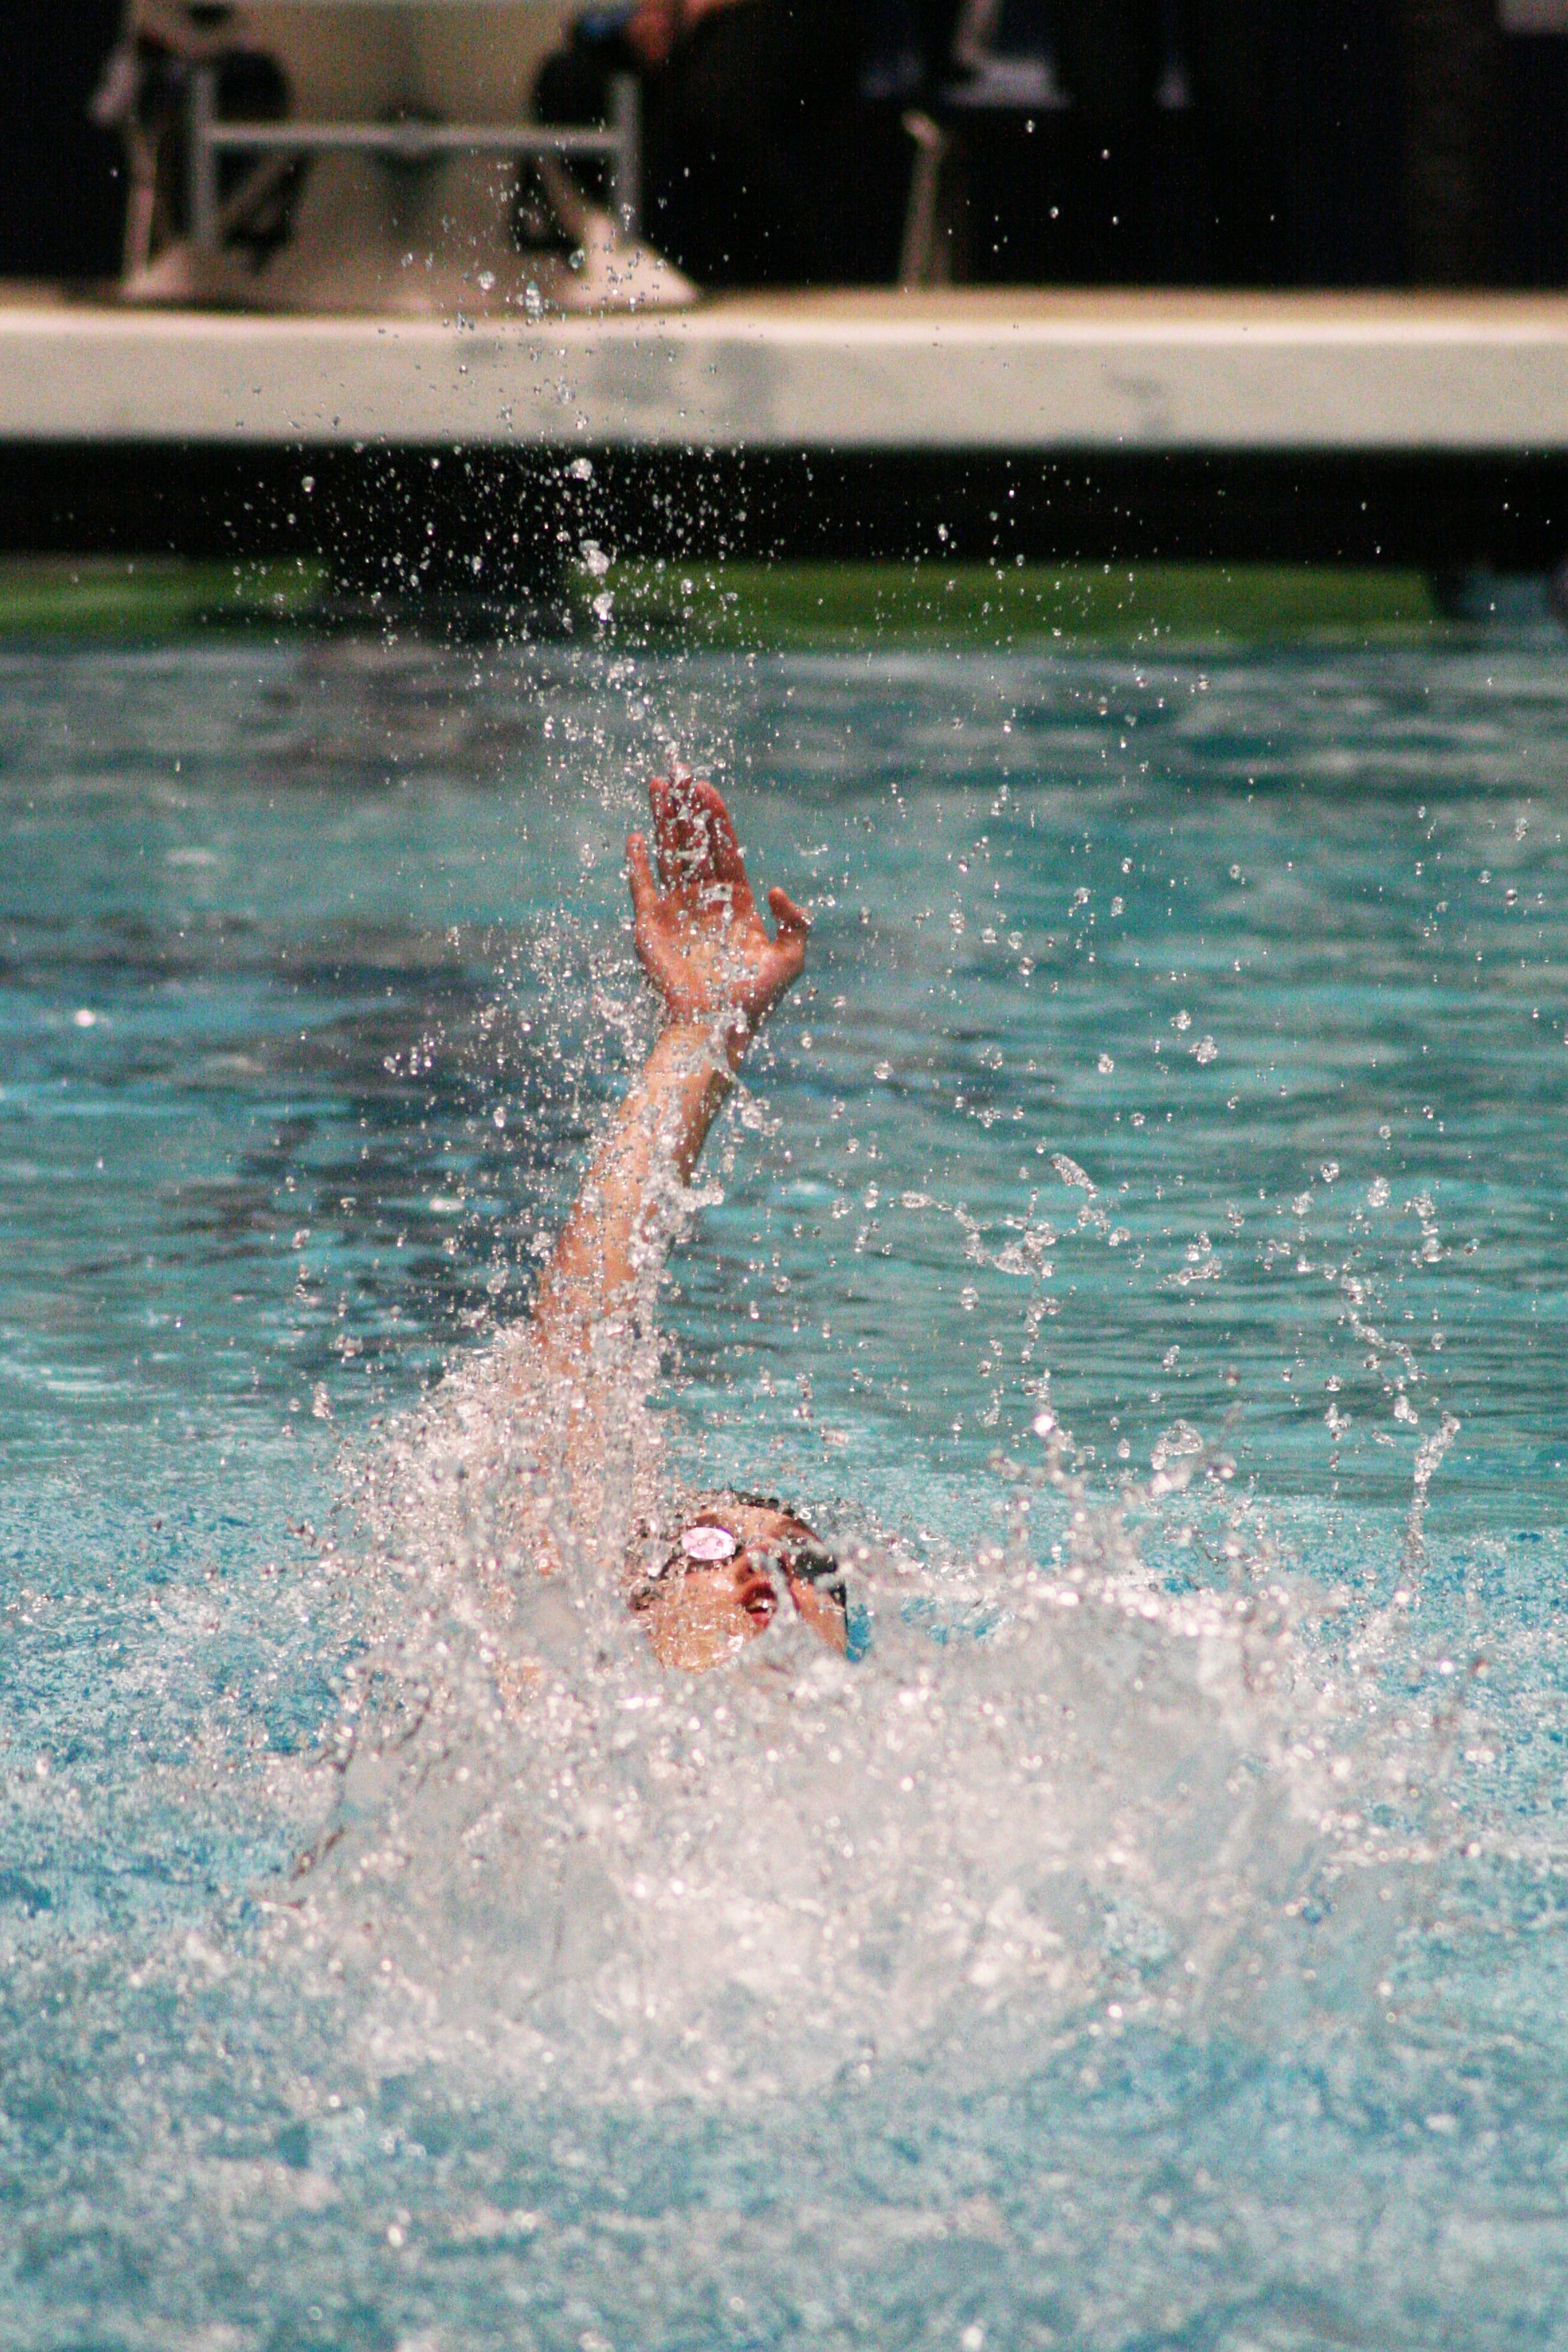 Kasey Calwell turns into the backstroke during the second lap of the 200 individual medley championship.